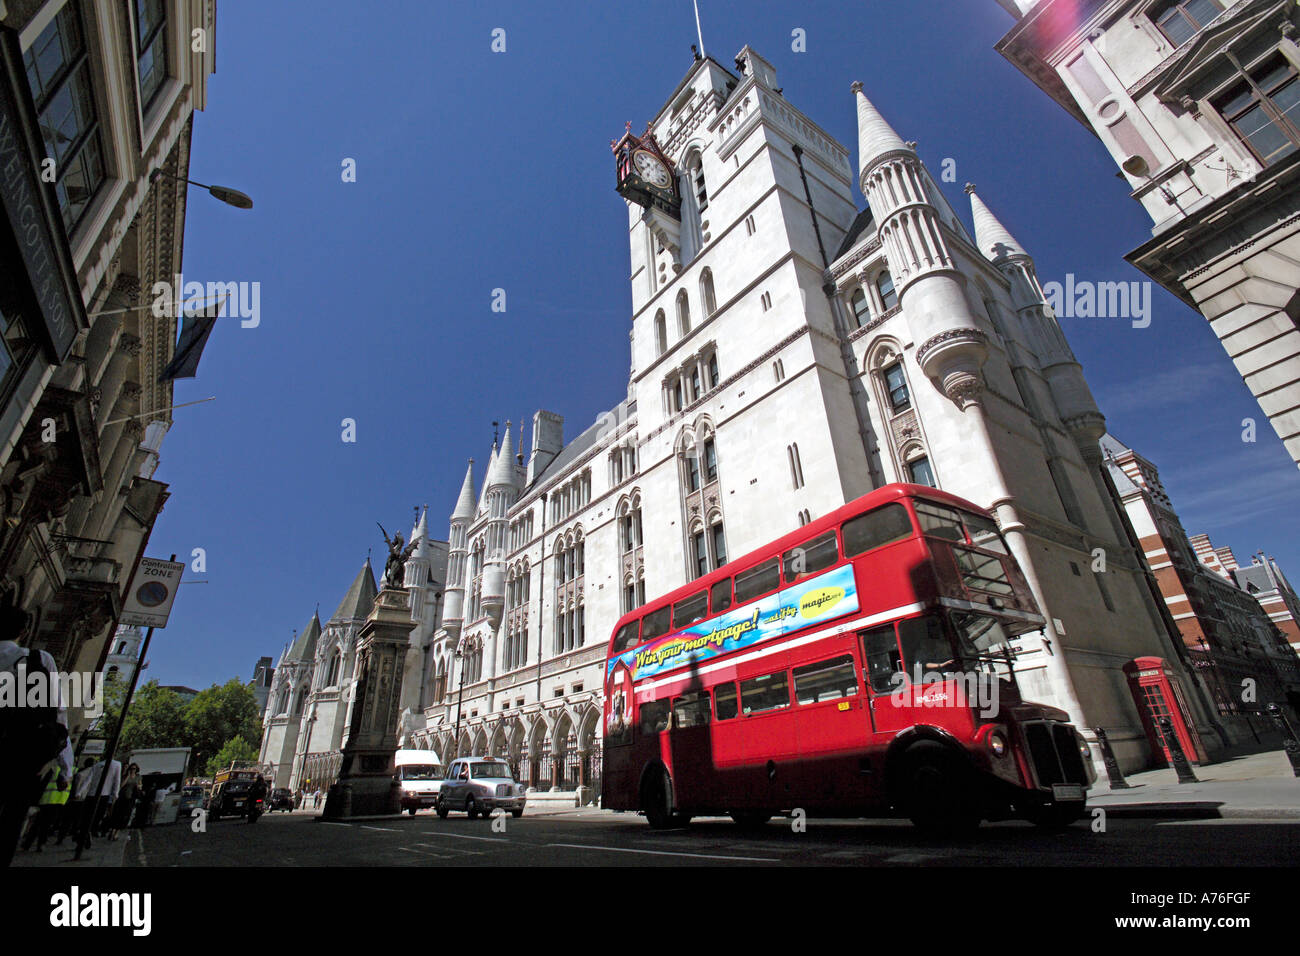 Low wide angle of a traditional red double decker route master bus passing the Royal Courts of Justice aka Law Courts in London. Stock Photo